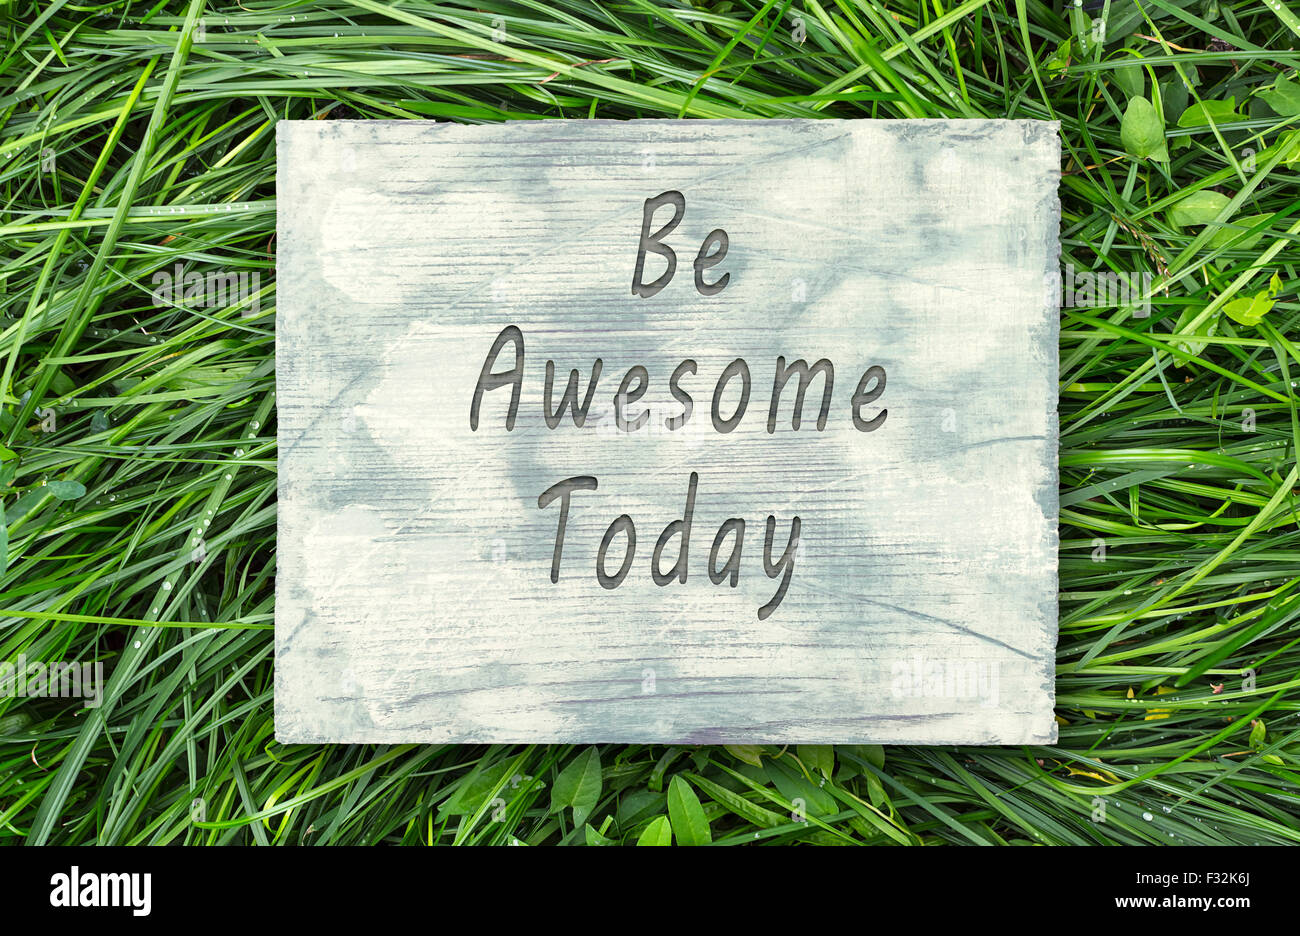 Vintage hipster motivational phrase note, Be Awesome Today sign. Stock Photo